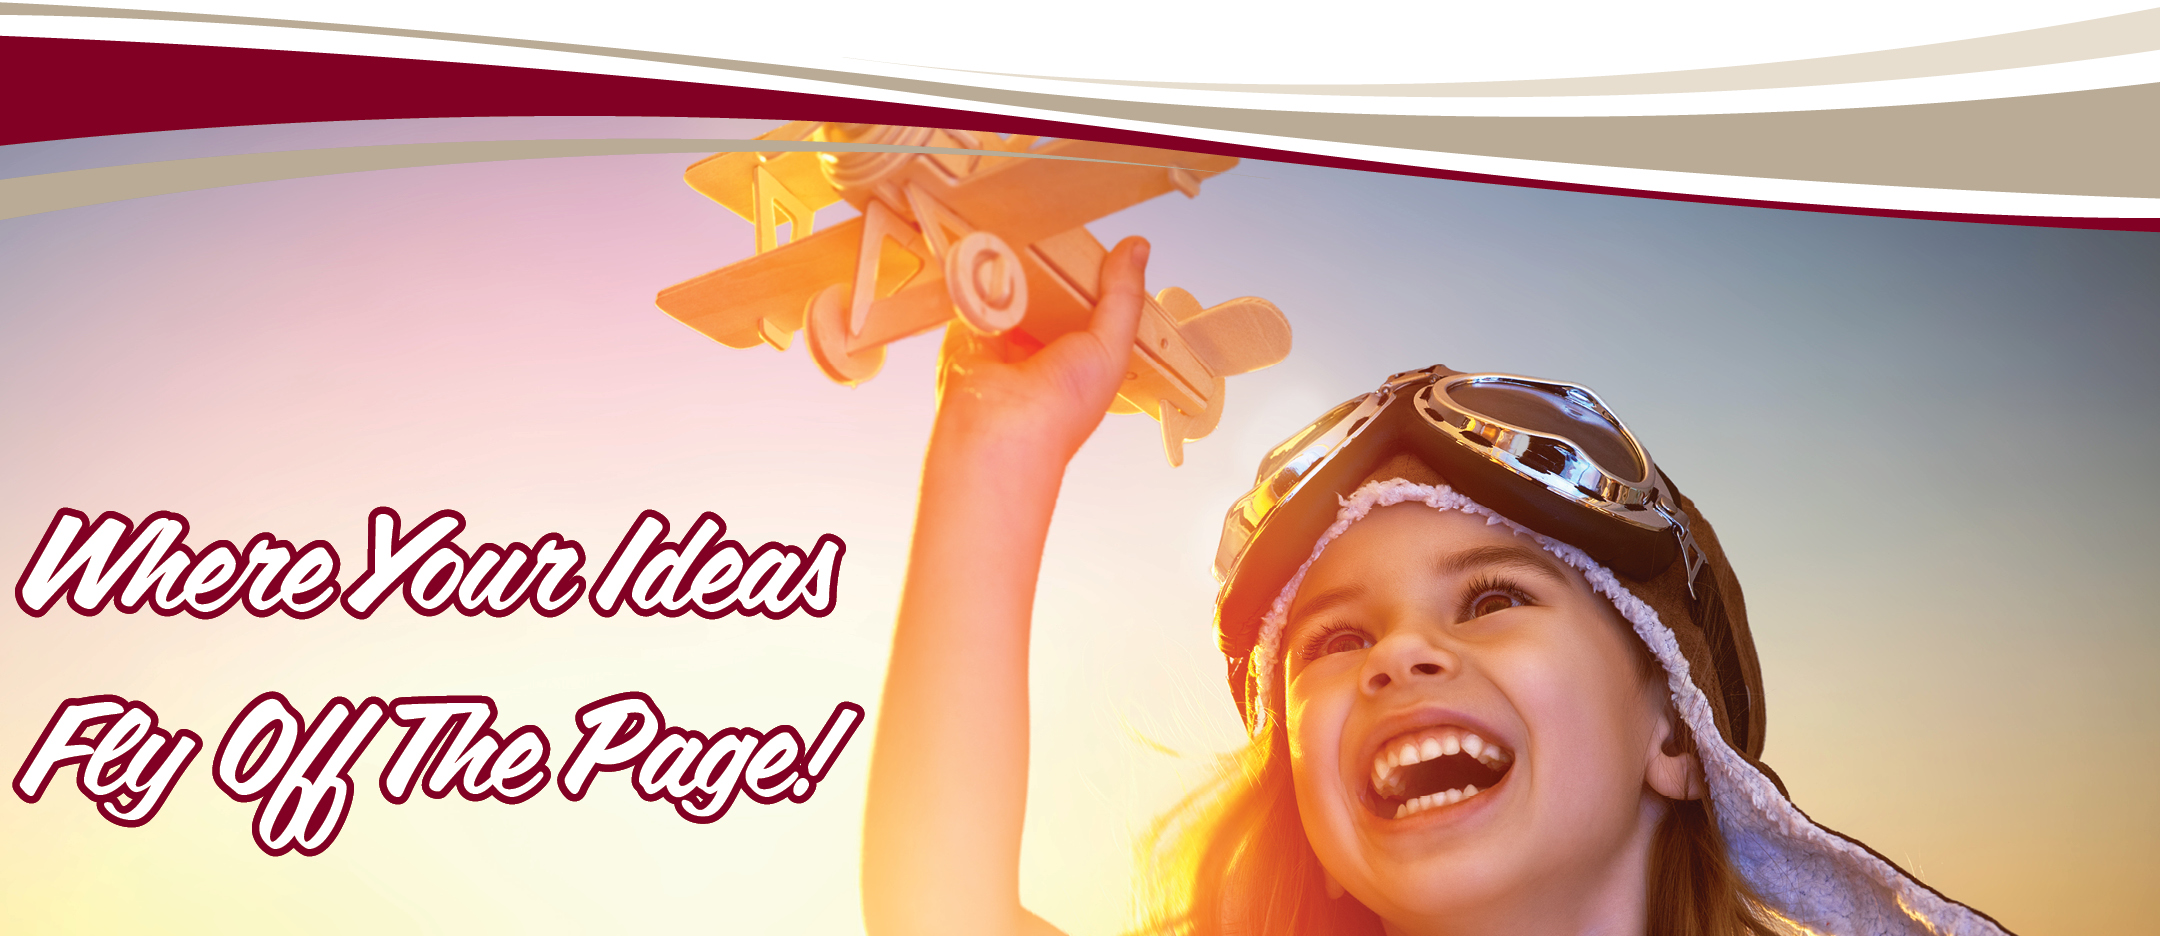 Image of girl with a toy plane saying Where Your Ideas Fly off The Page